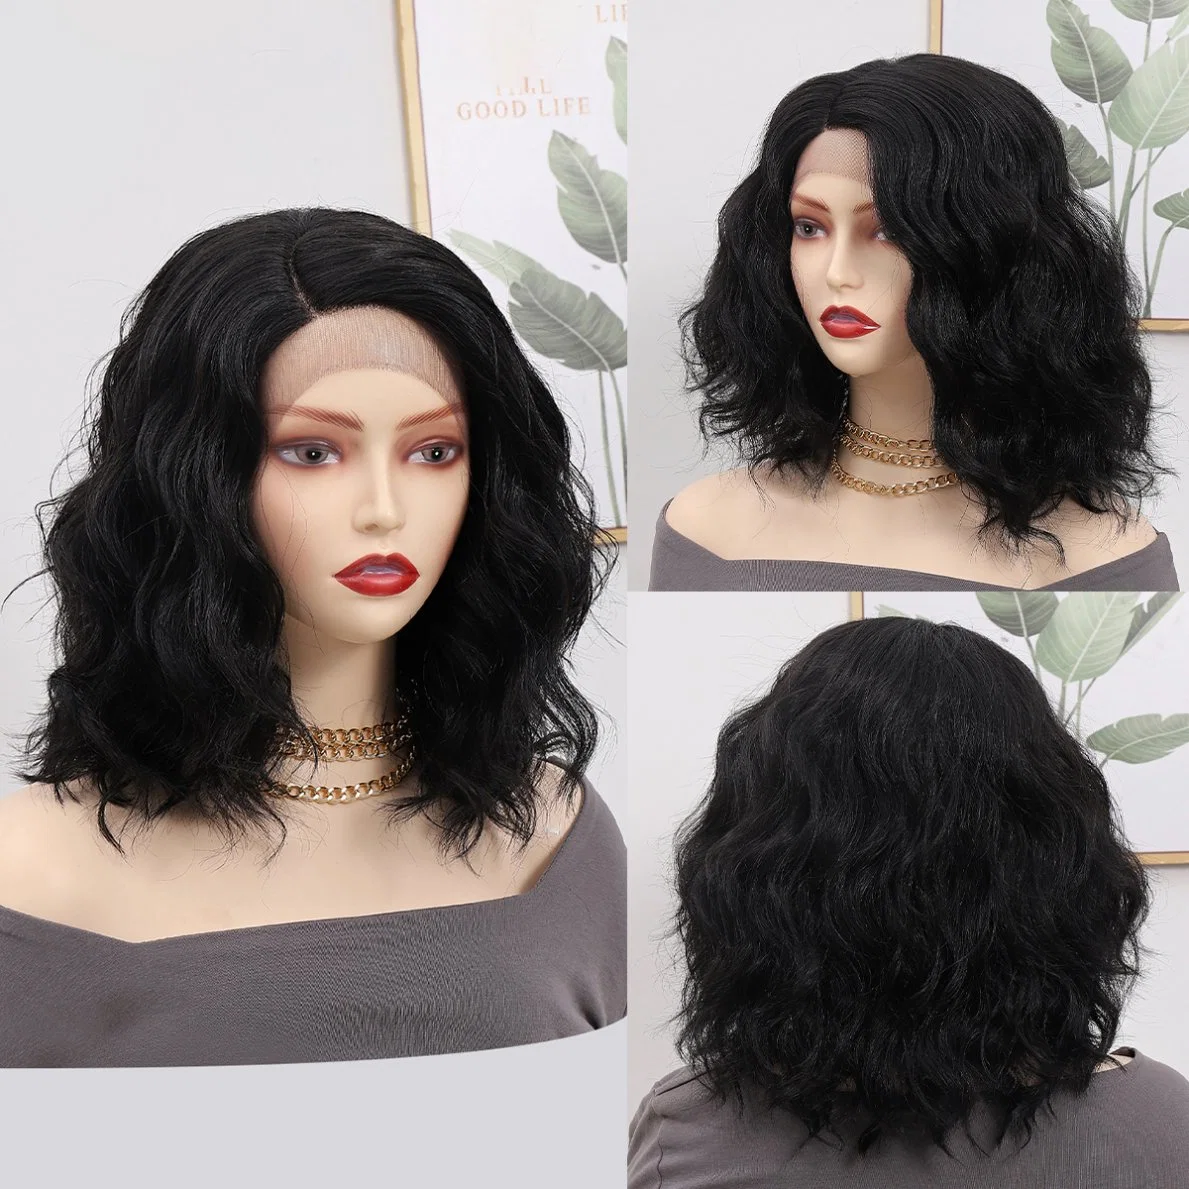 New Fashion Women&prime; S Wig Black Color Curly Hair Lace Wigs